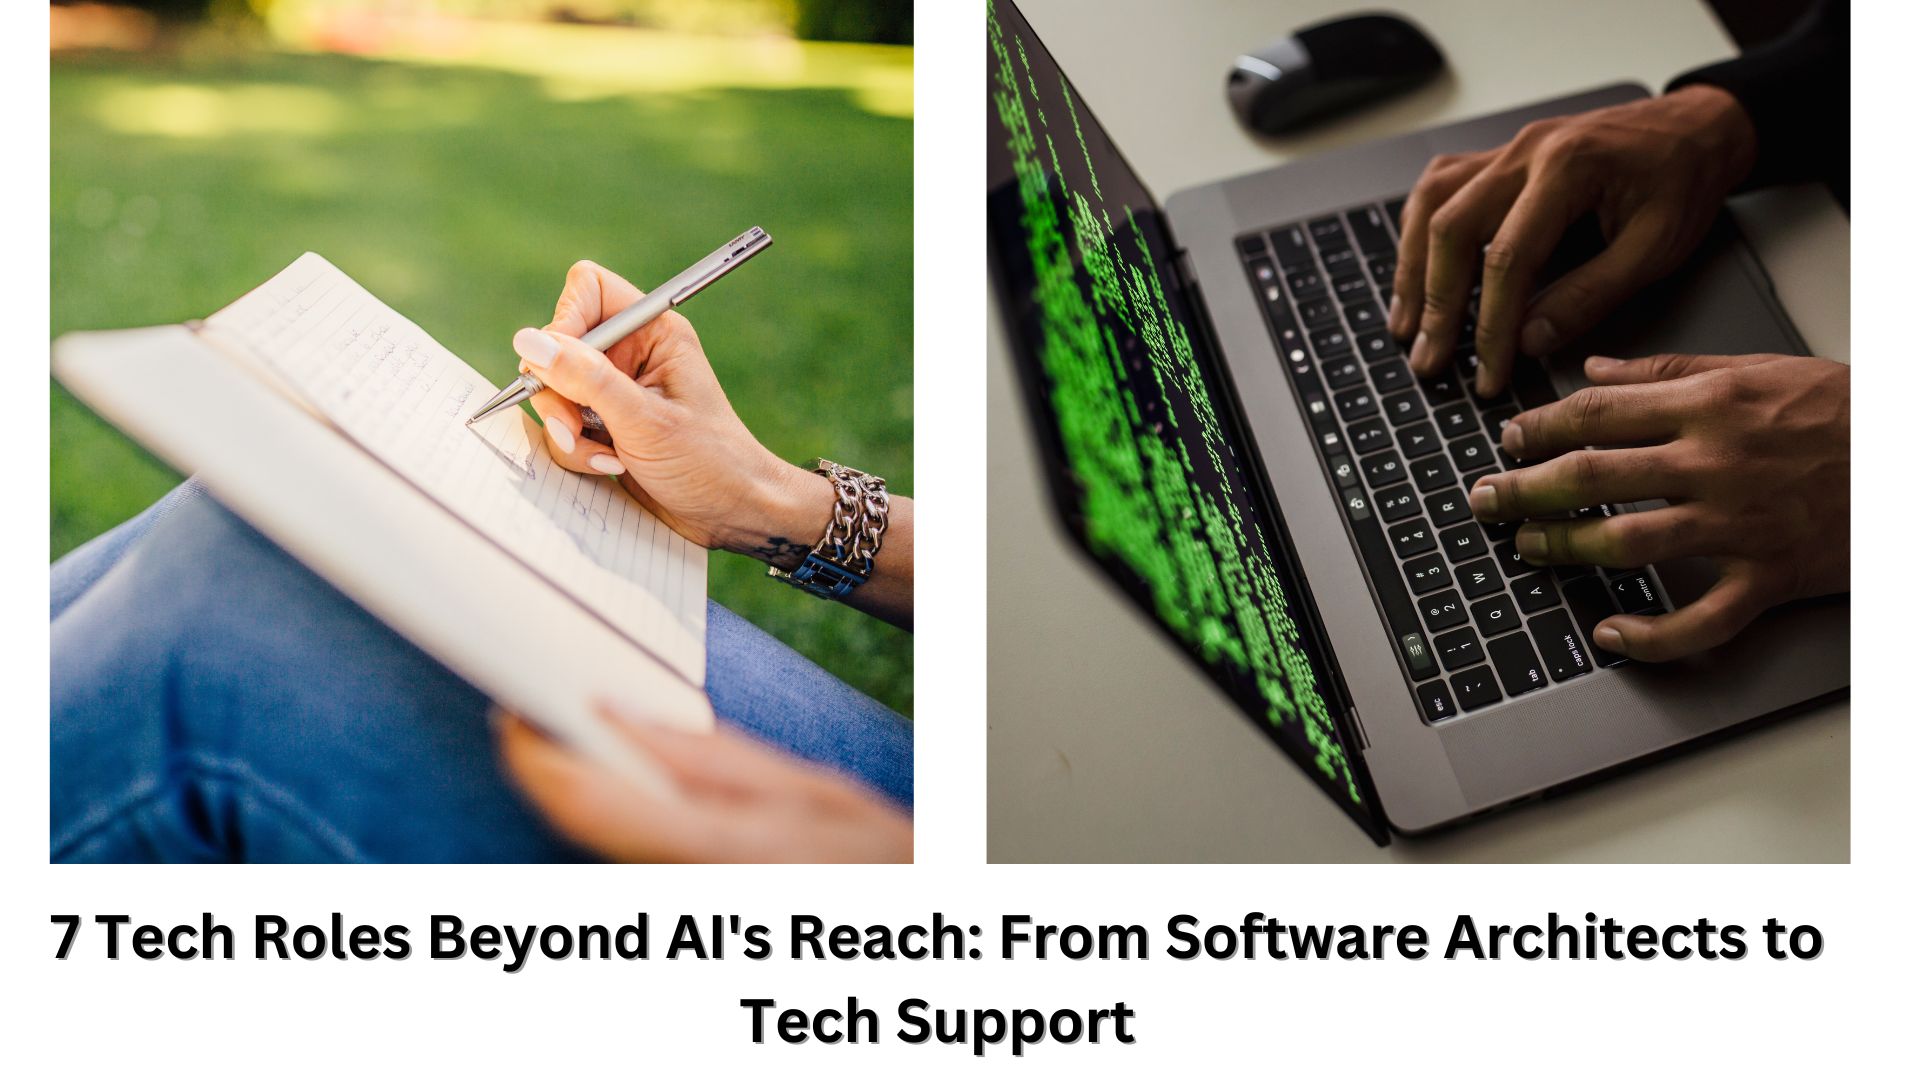 7 Tech Roles Beyond AI's Reach: From Software Architects to Tech Support